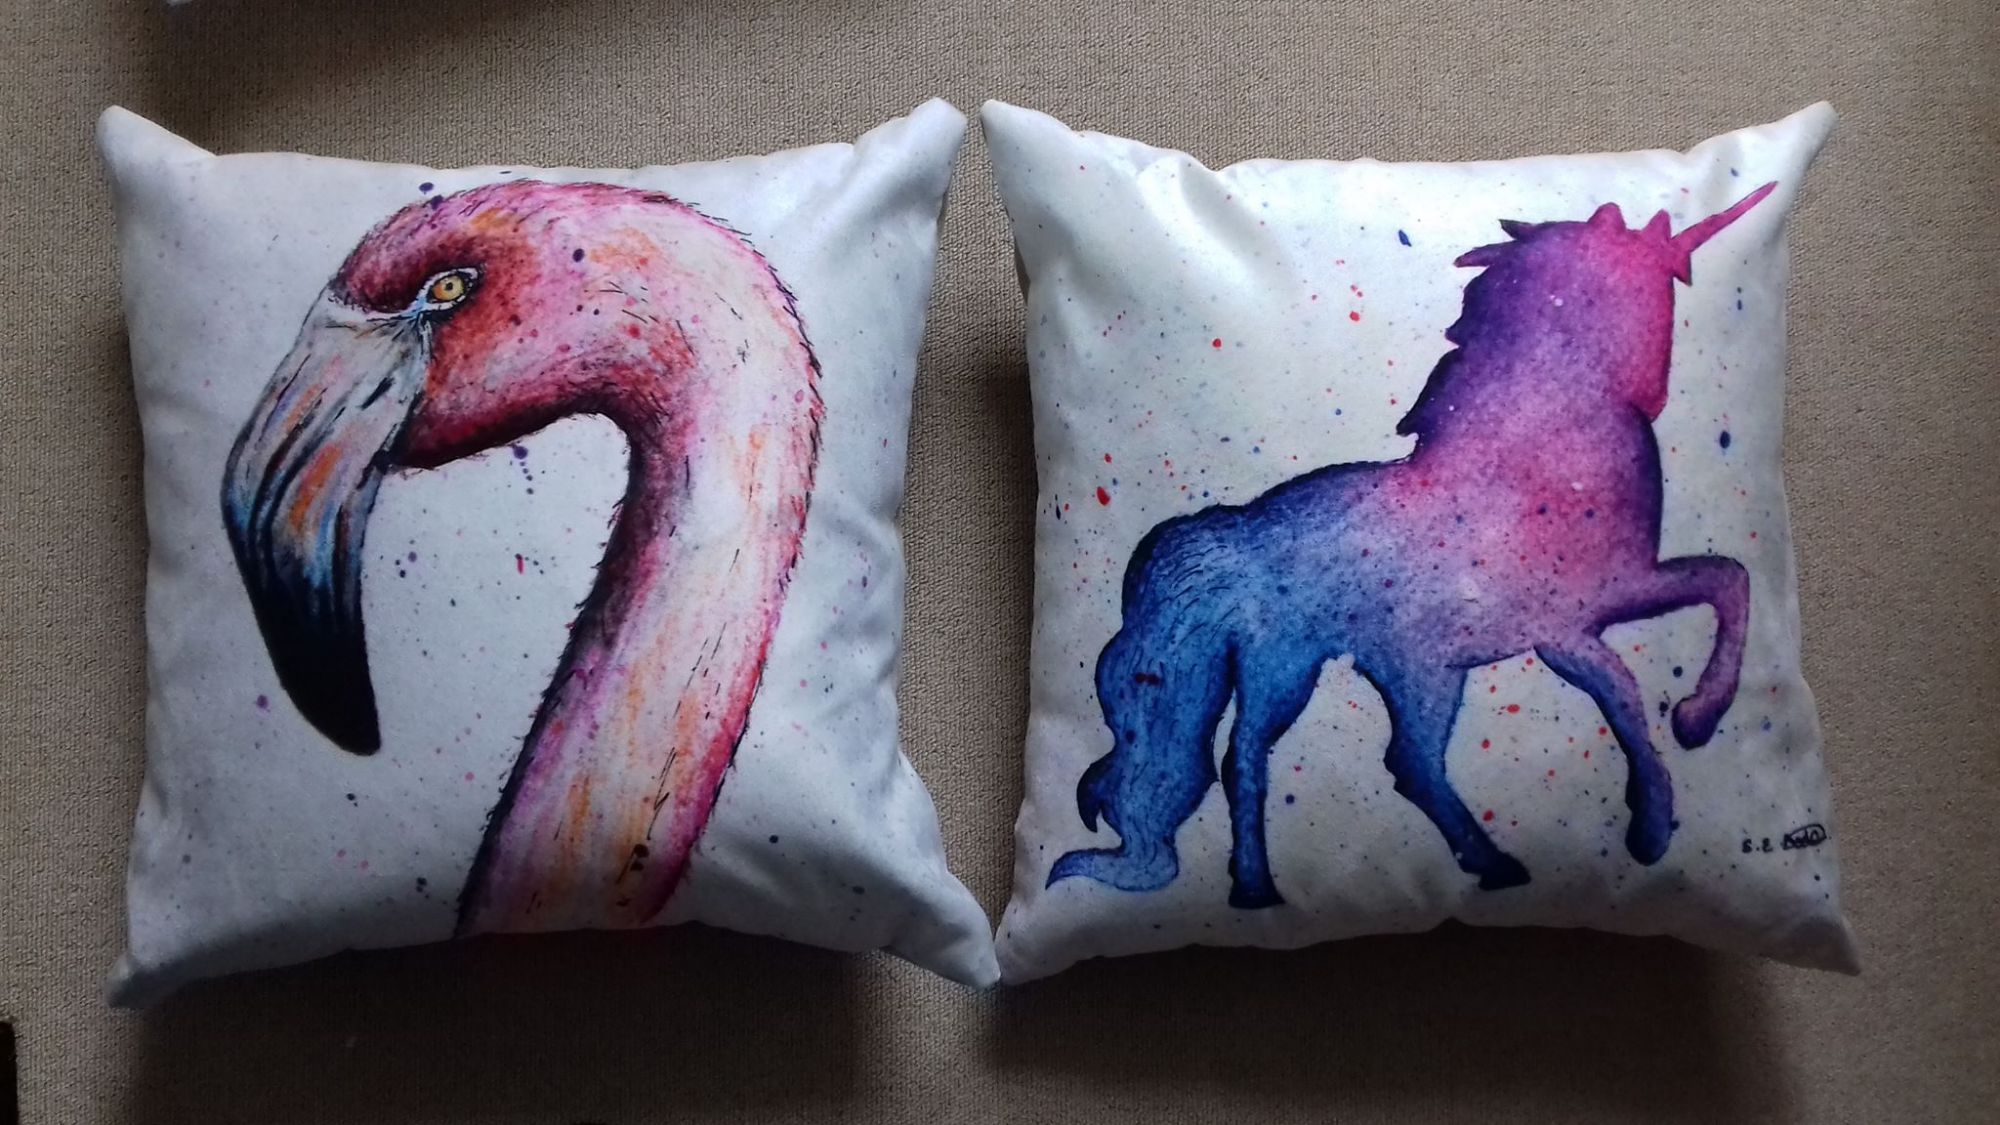 Large Cushions using our own art work. 